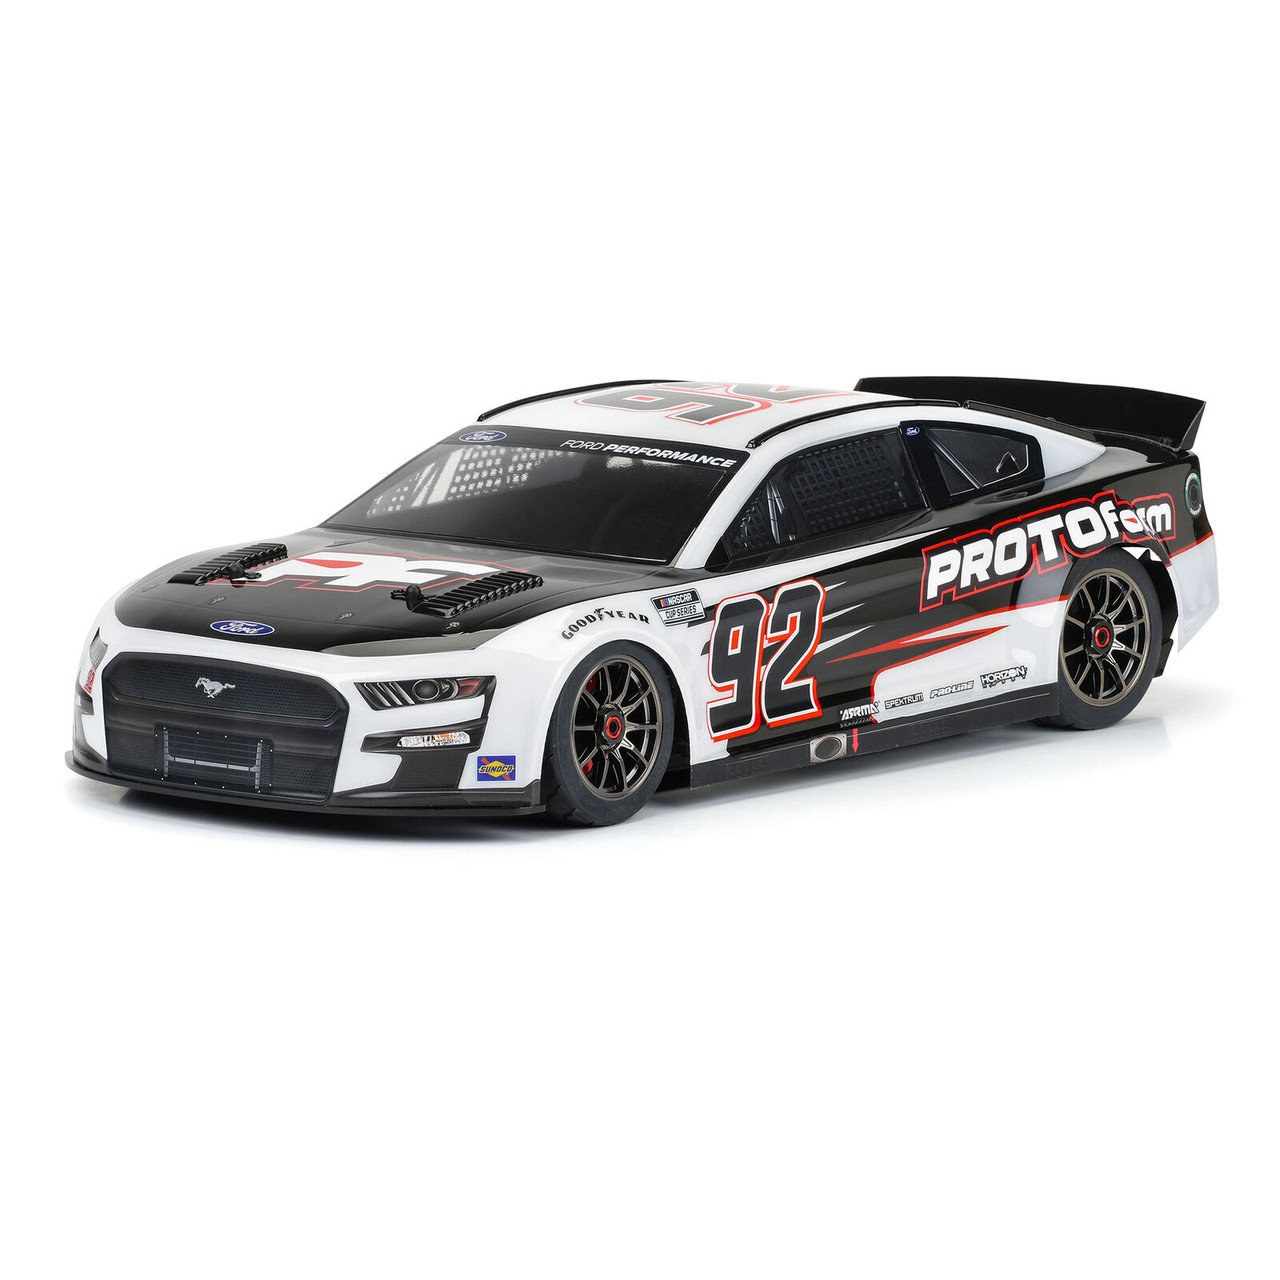 Protoform 1587-00 1/7 2022 NASCAR Cup Series Ford Mustang Clear Body: Infraction 6S